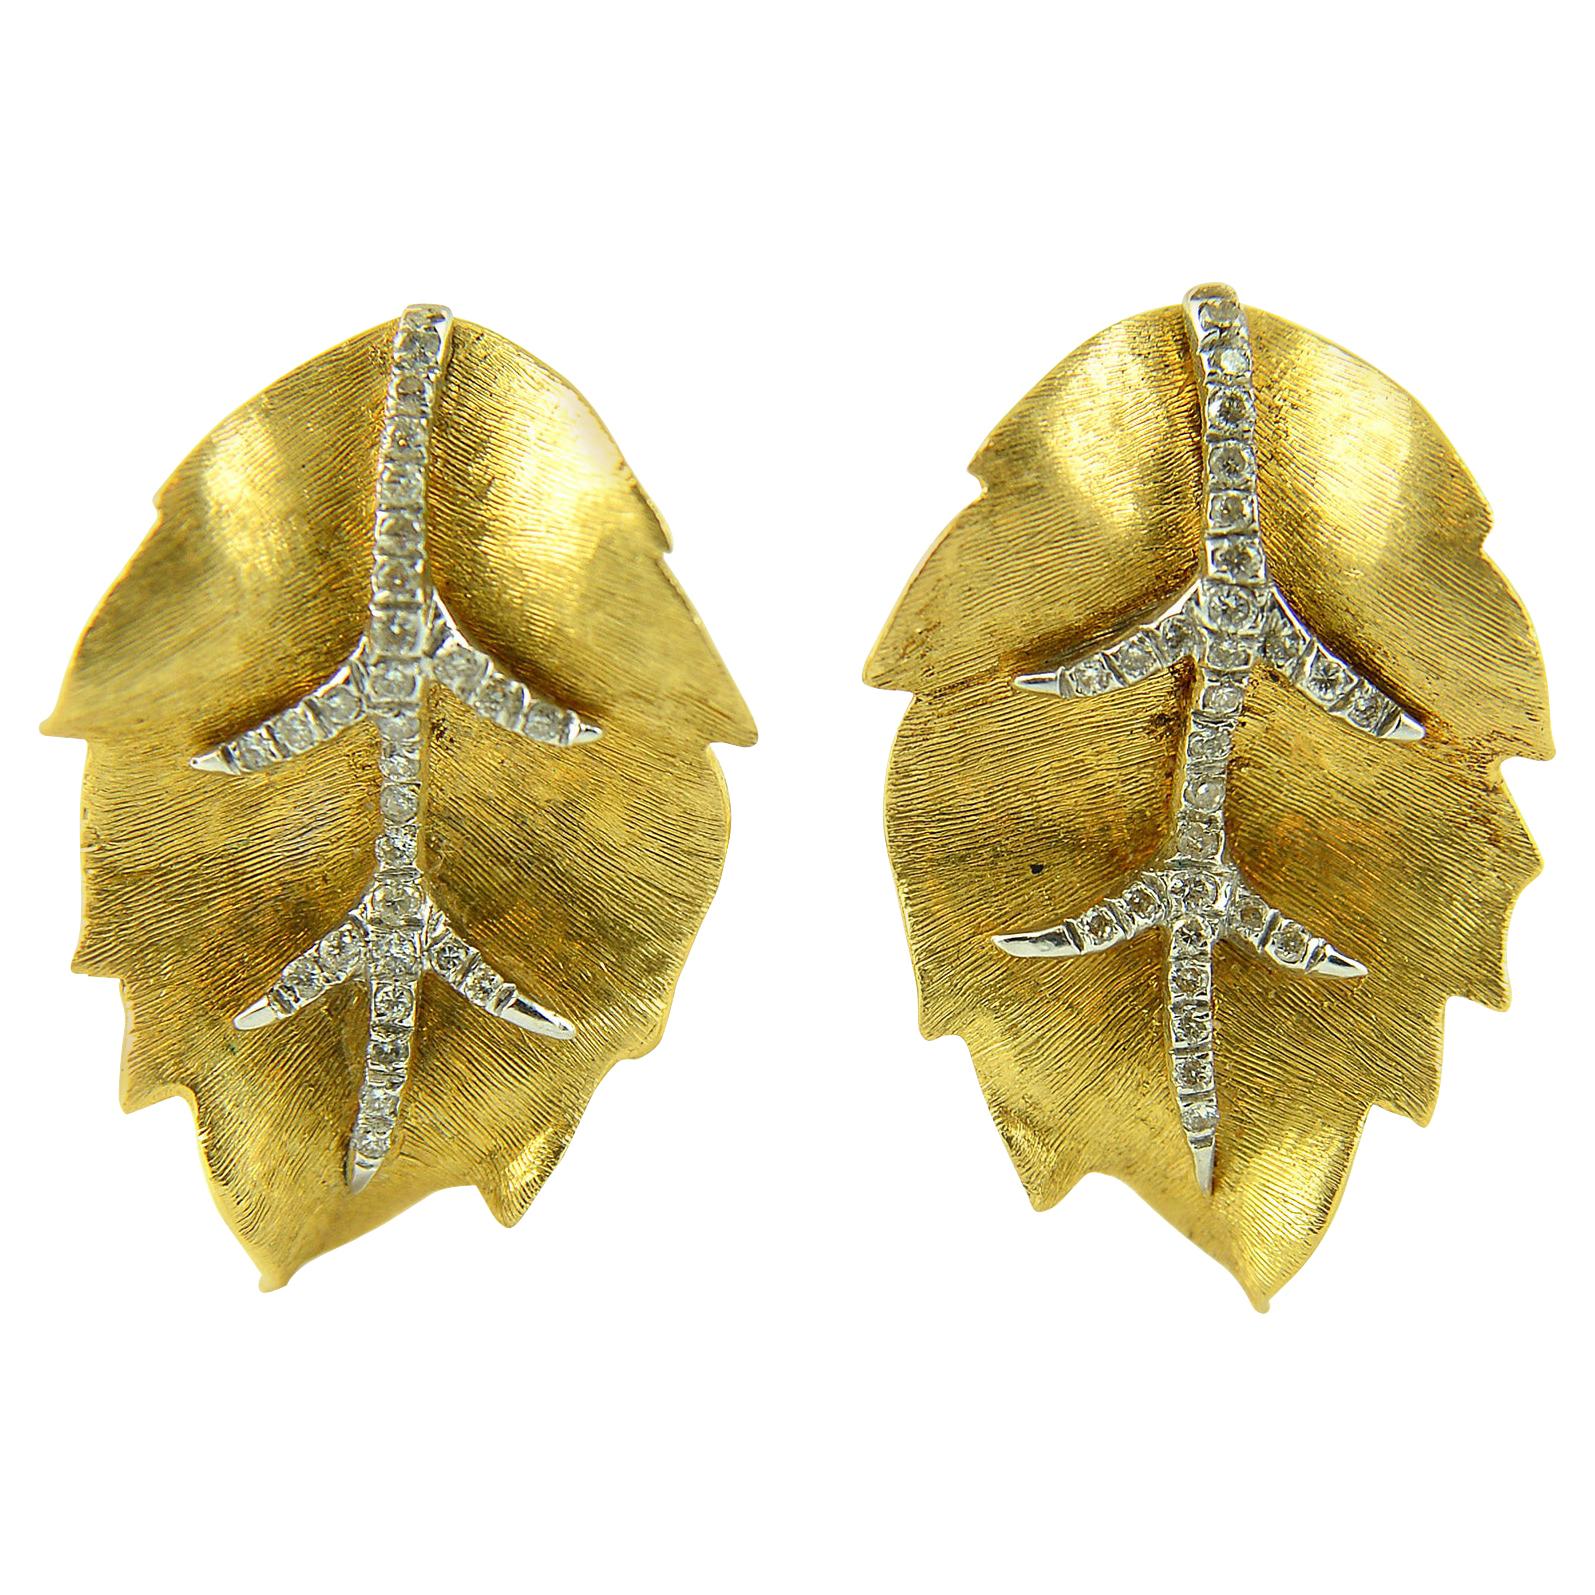 Diamond and 18k Yellow Gold Leaf Earrings